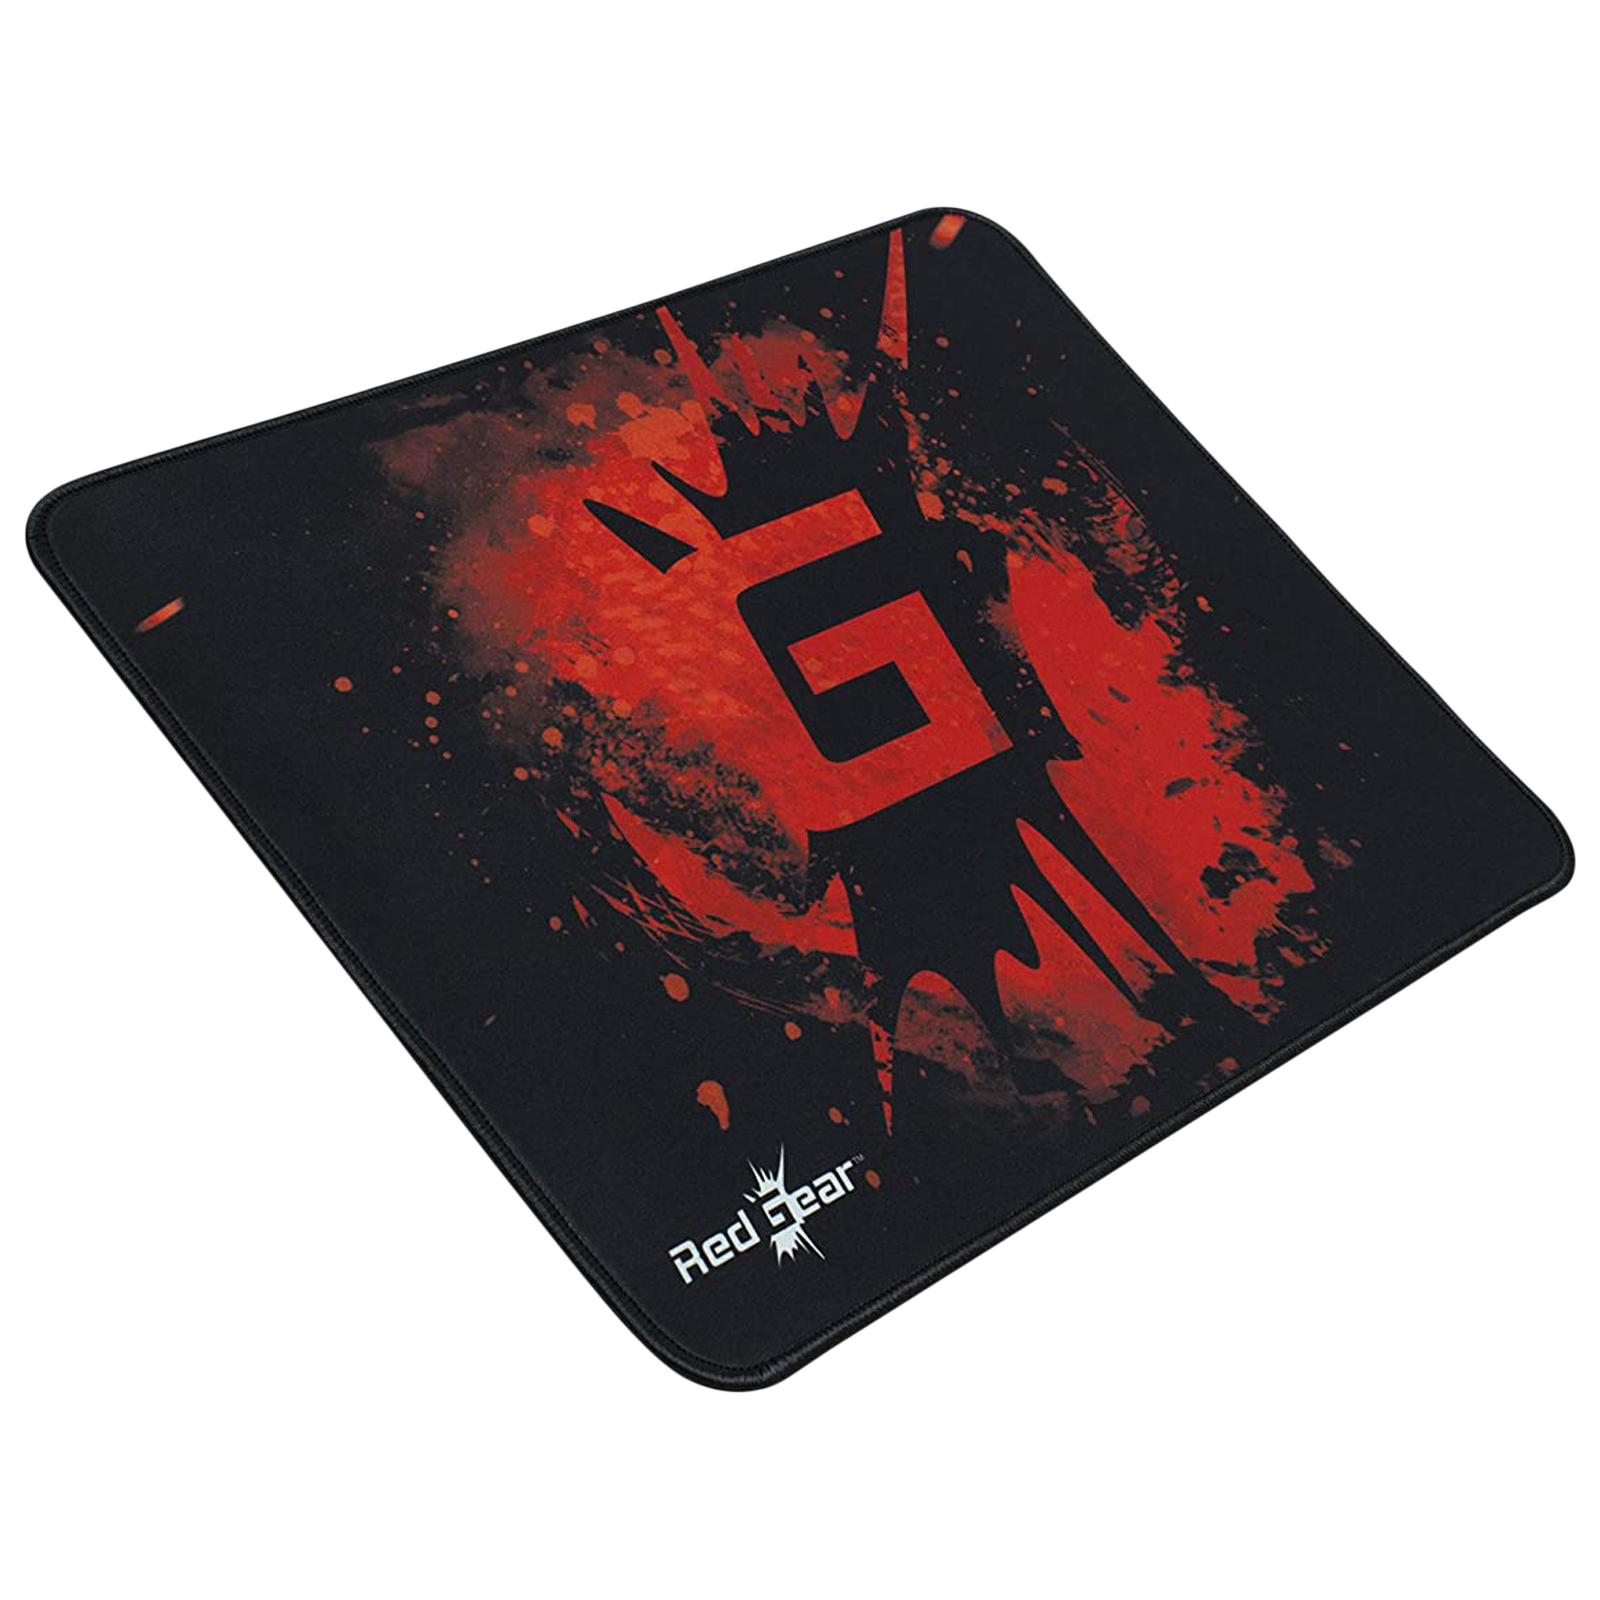 Redgear MP44 Gaming Mouse Pad (Quick Response, 8904130845642, Black)